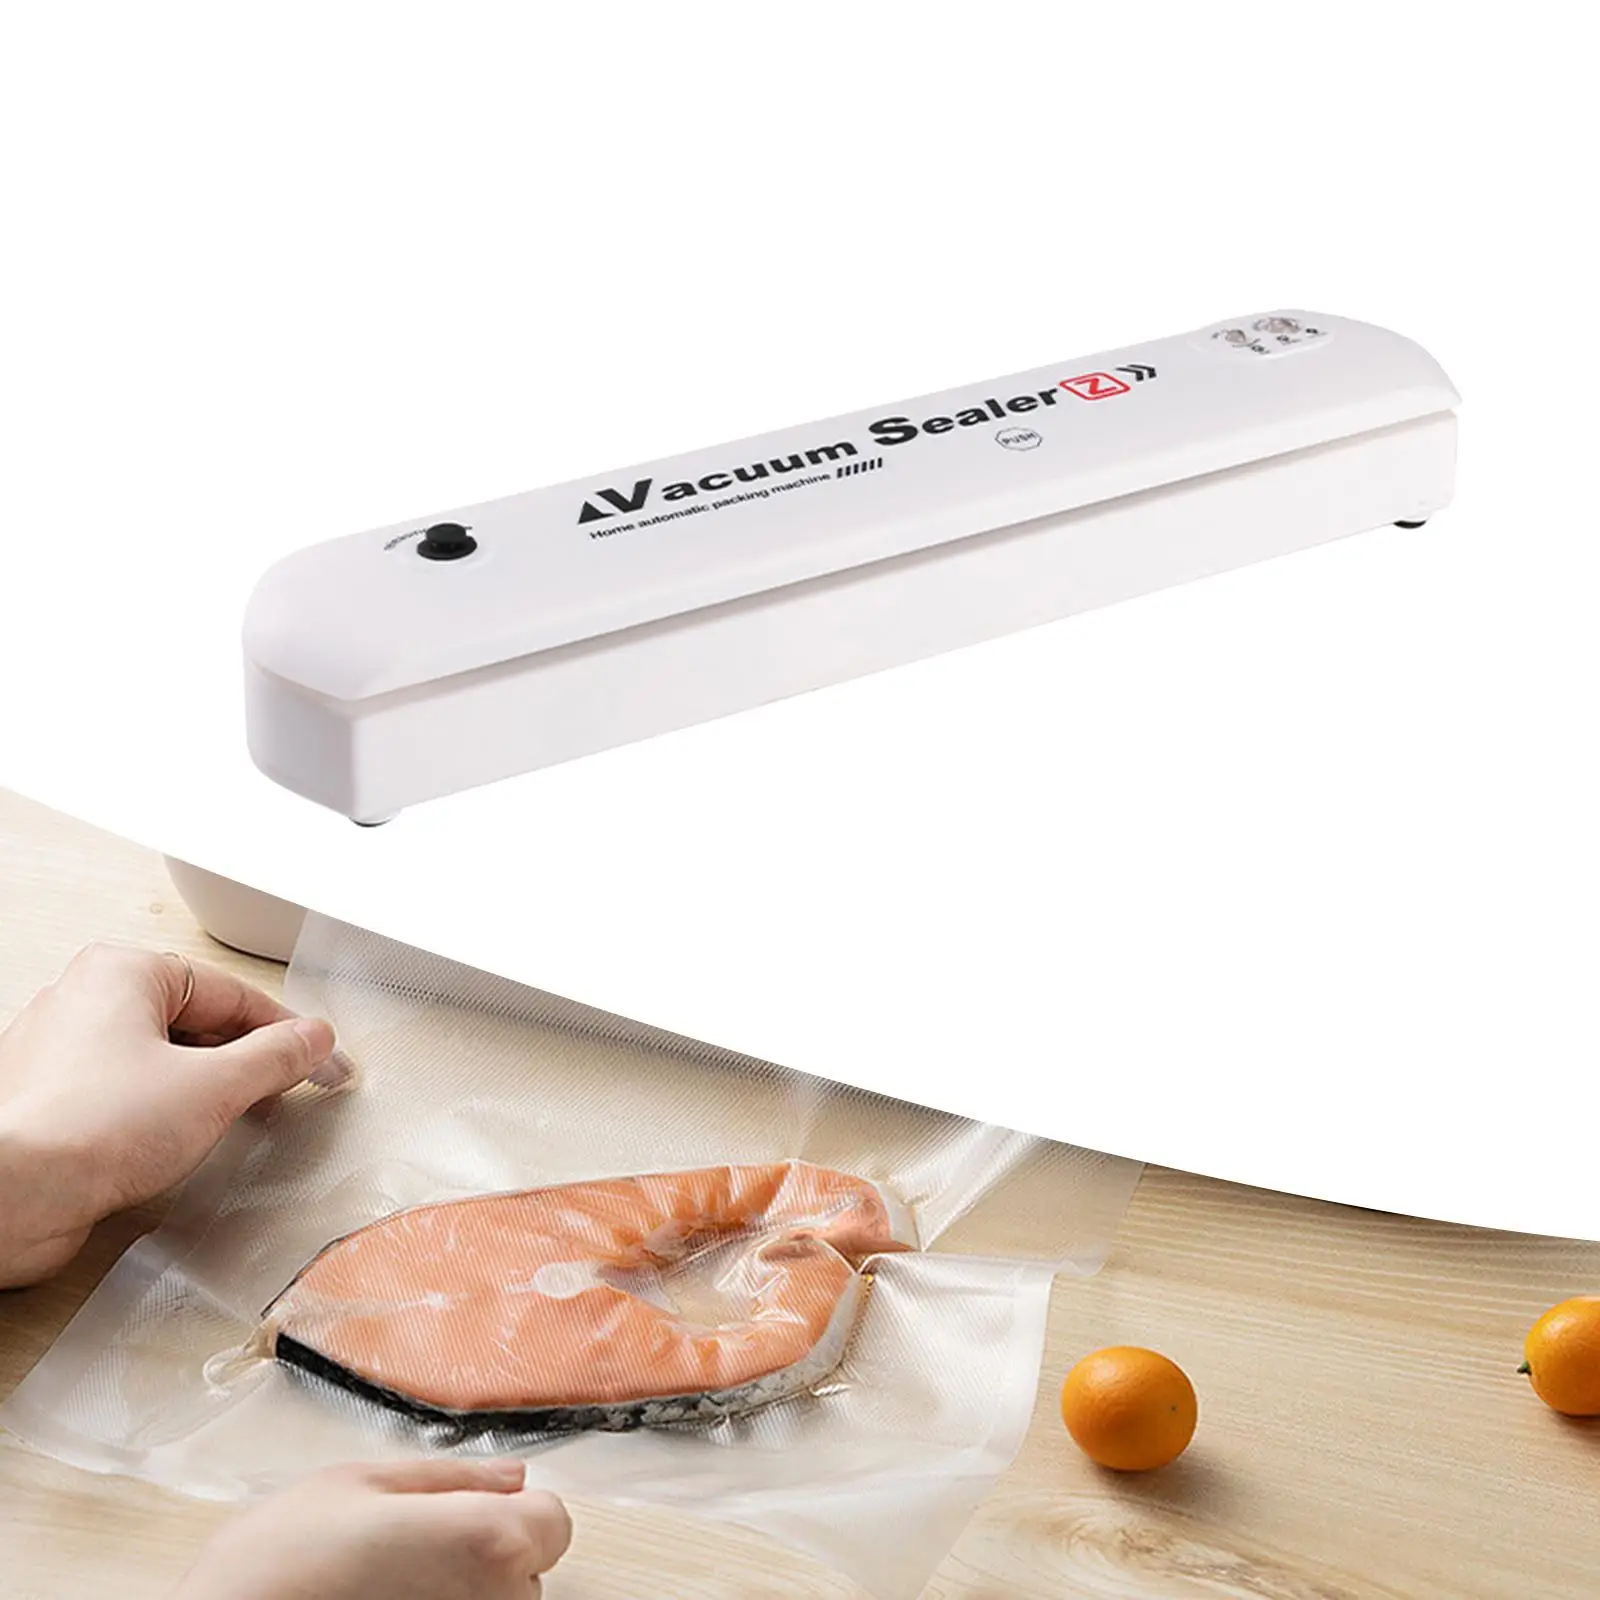 Automatic Seal Storage Household Food Preservation Multi Purpose Lightweight Chip Bag Sealer for Nuts Bread Meat Seafood Snacks